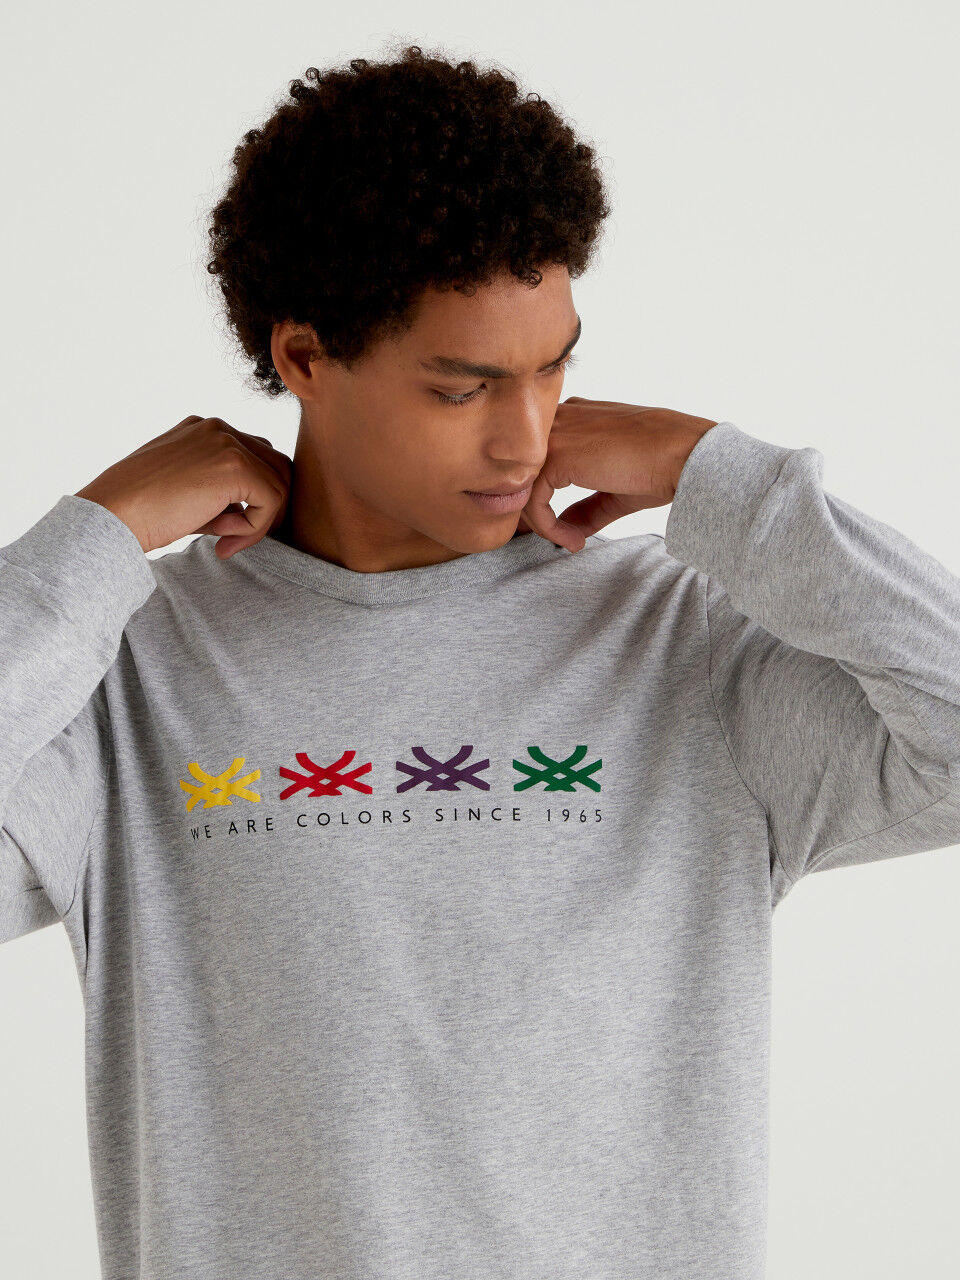 Men's Long Sleeve T-shirts New Collection | Benetton